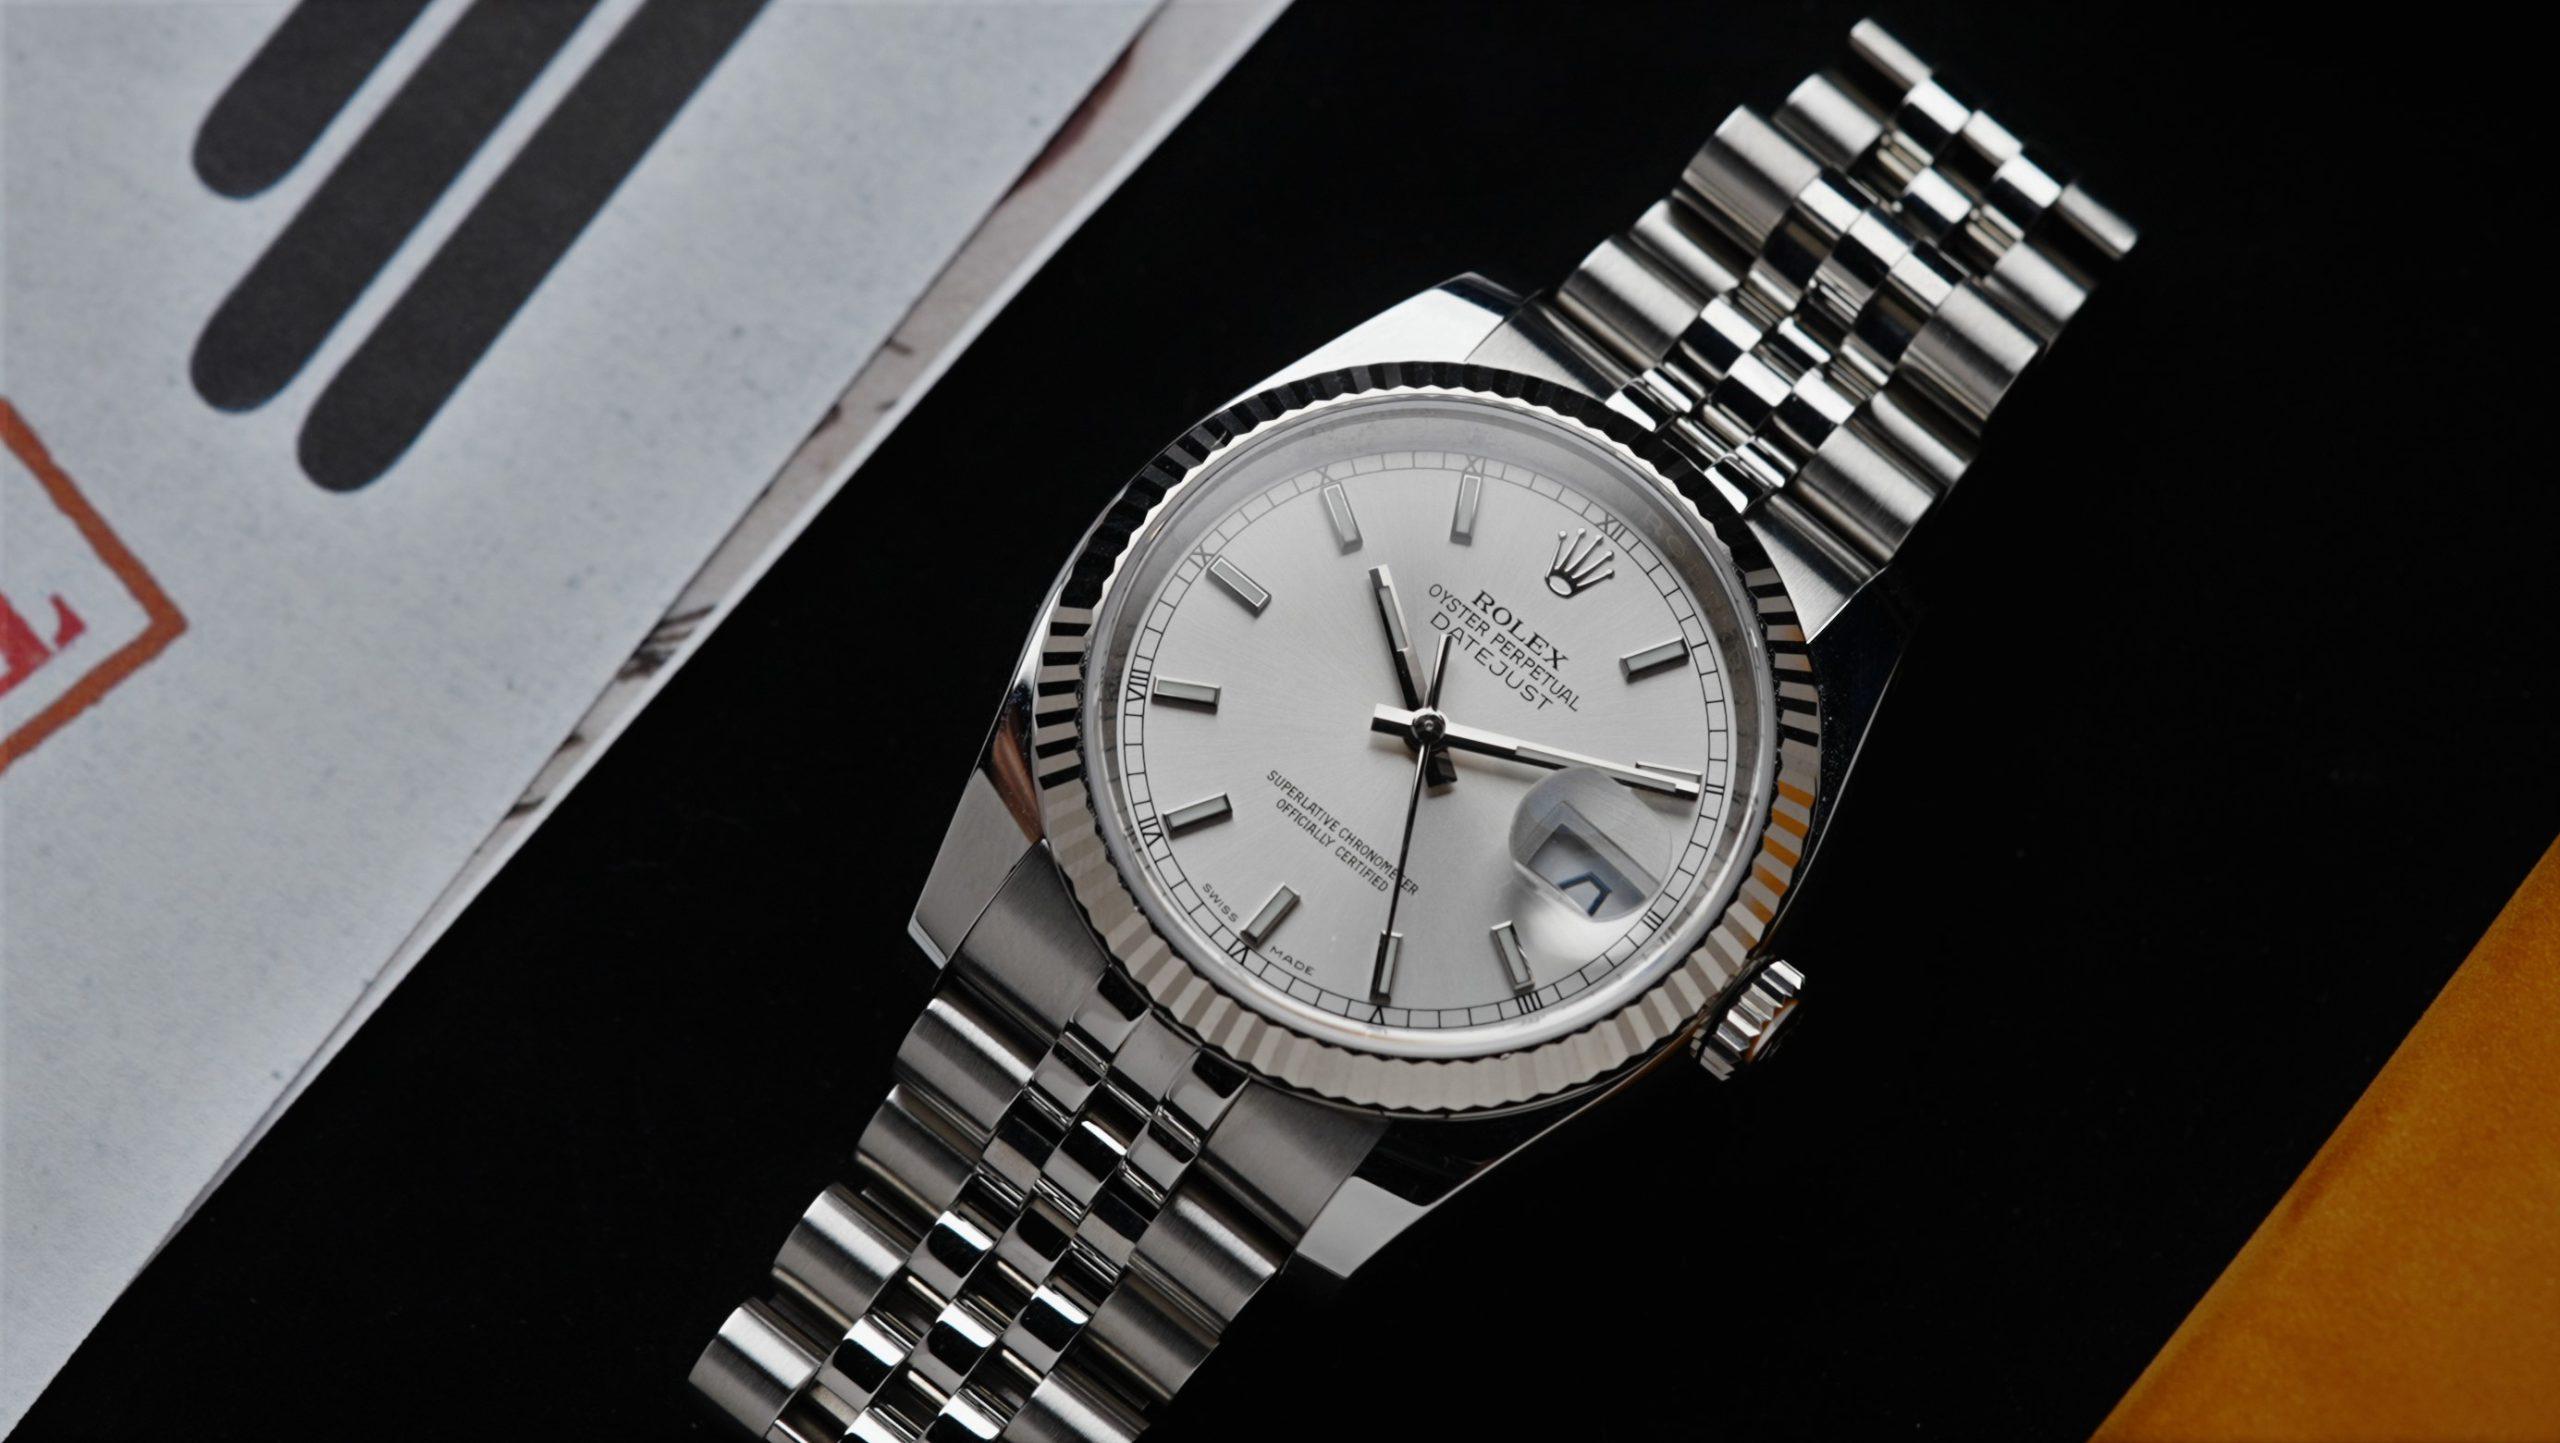 Rolex Datejust 36 Silver Dial watch pictured on an angle under white lighting.